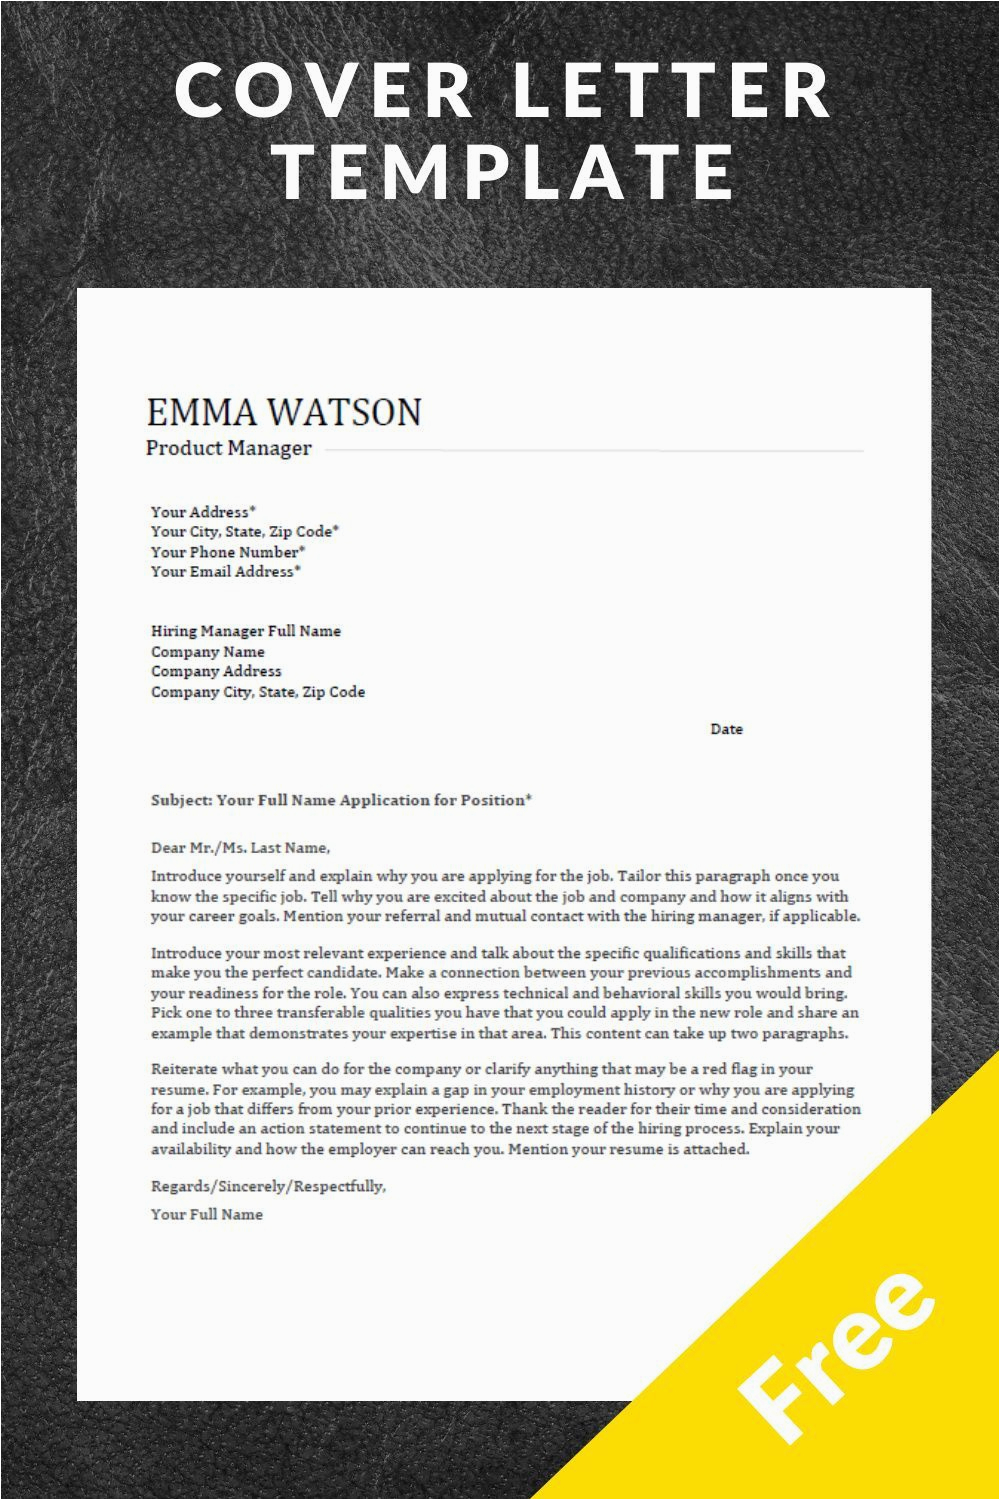 Resume and Cover Letter Template Download Cover Letter Template Download for Free